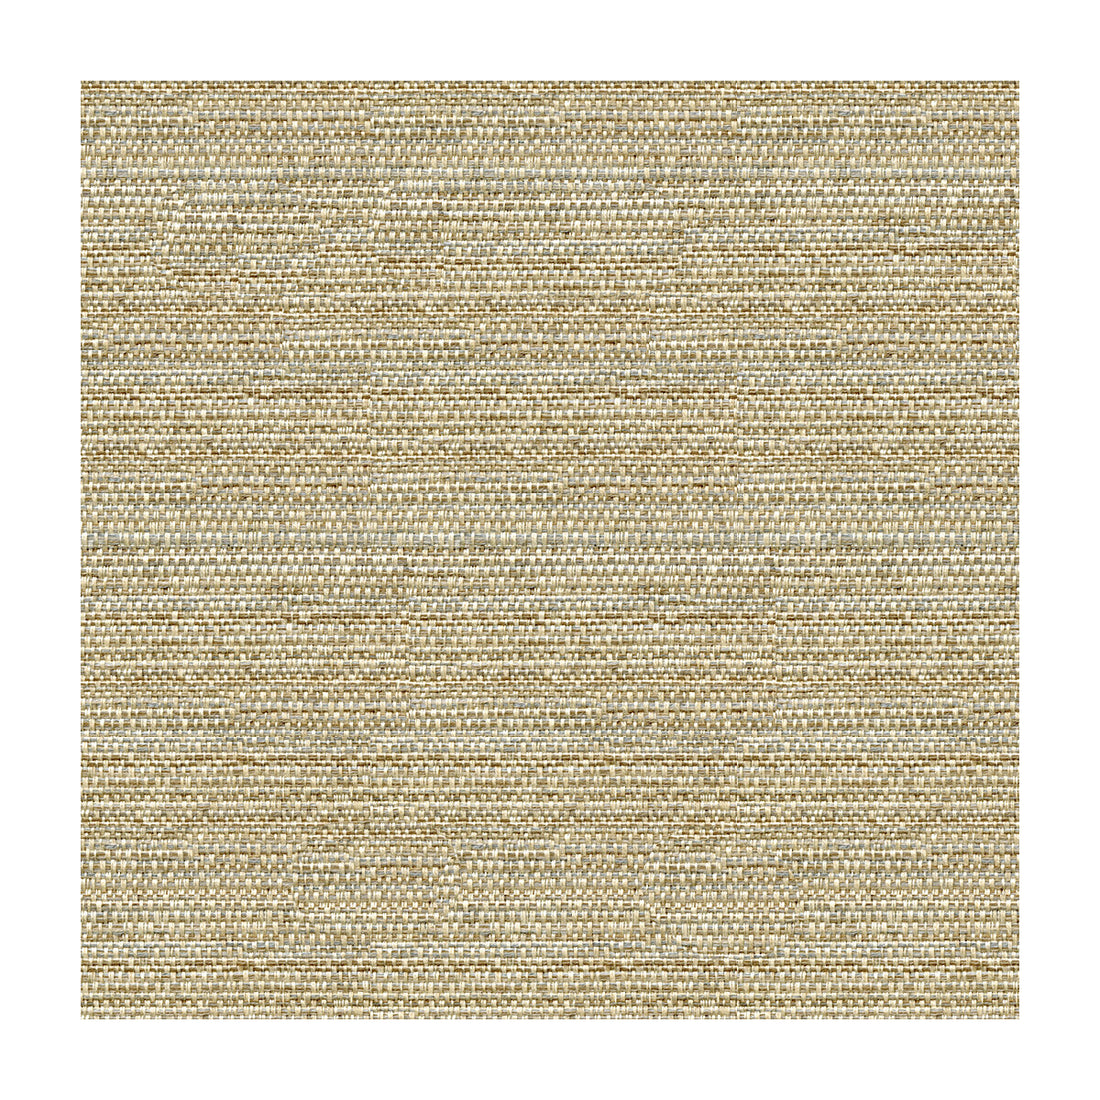 Helm fabric in dune color - pattern 34869.1611.0 - by Kravet Design in the Oceania Indoor Outdoor collection